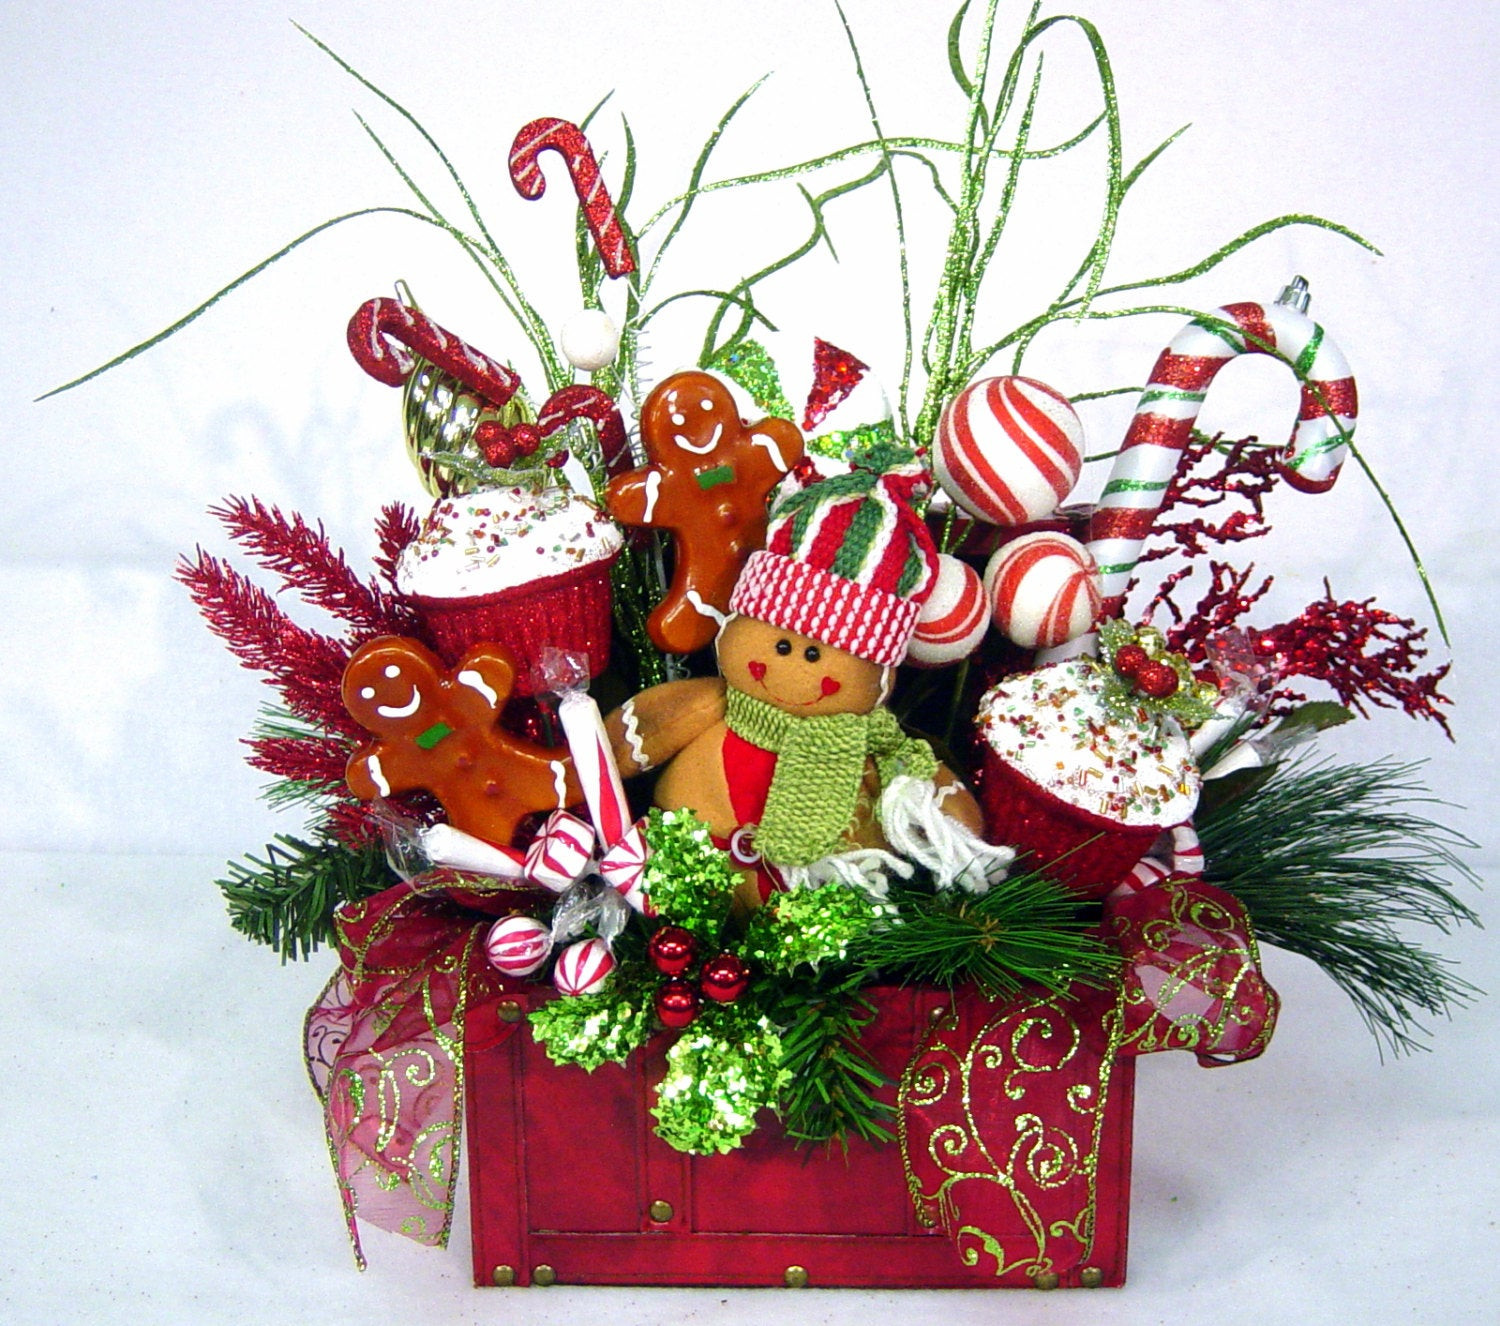 Christmas Flower Centerpieces
 Gingerbread Sweet Treat Christmas Floral Arrangement Holiday